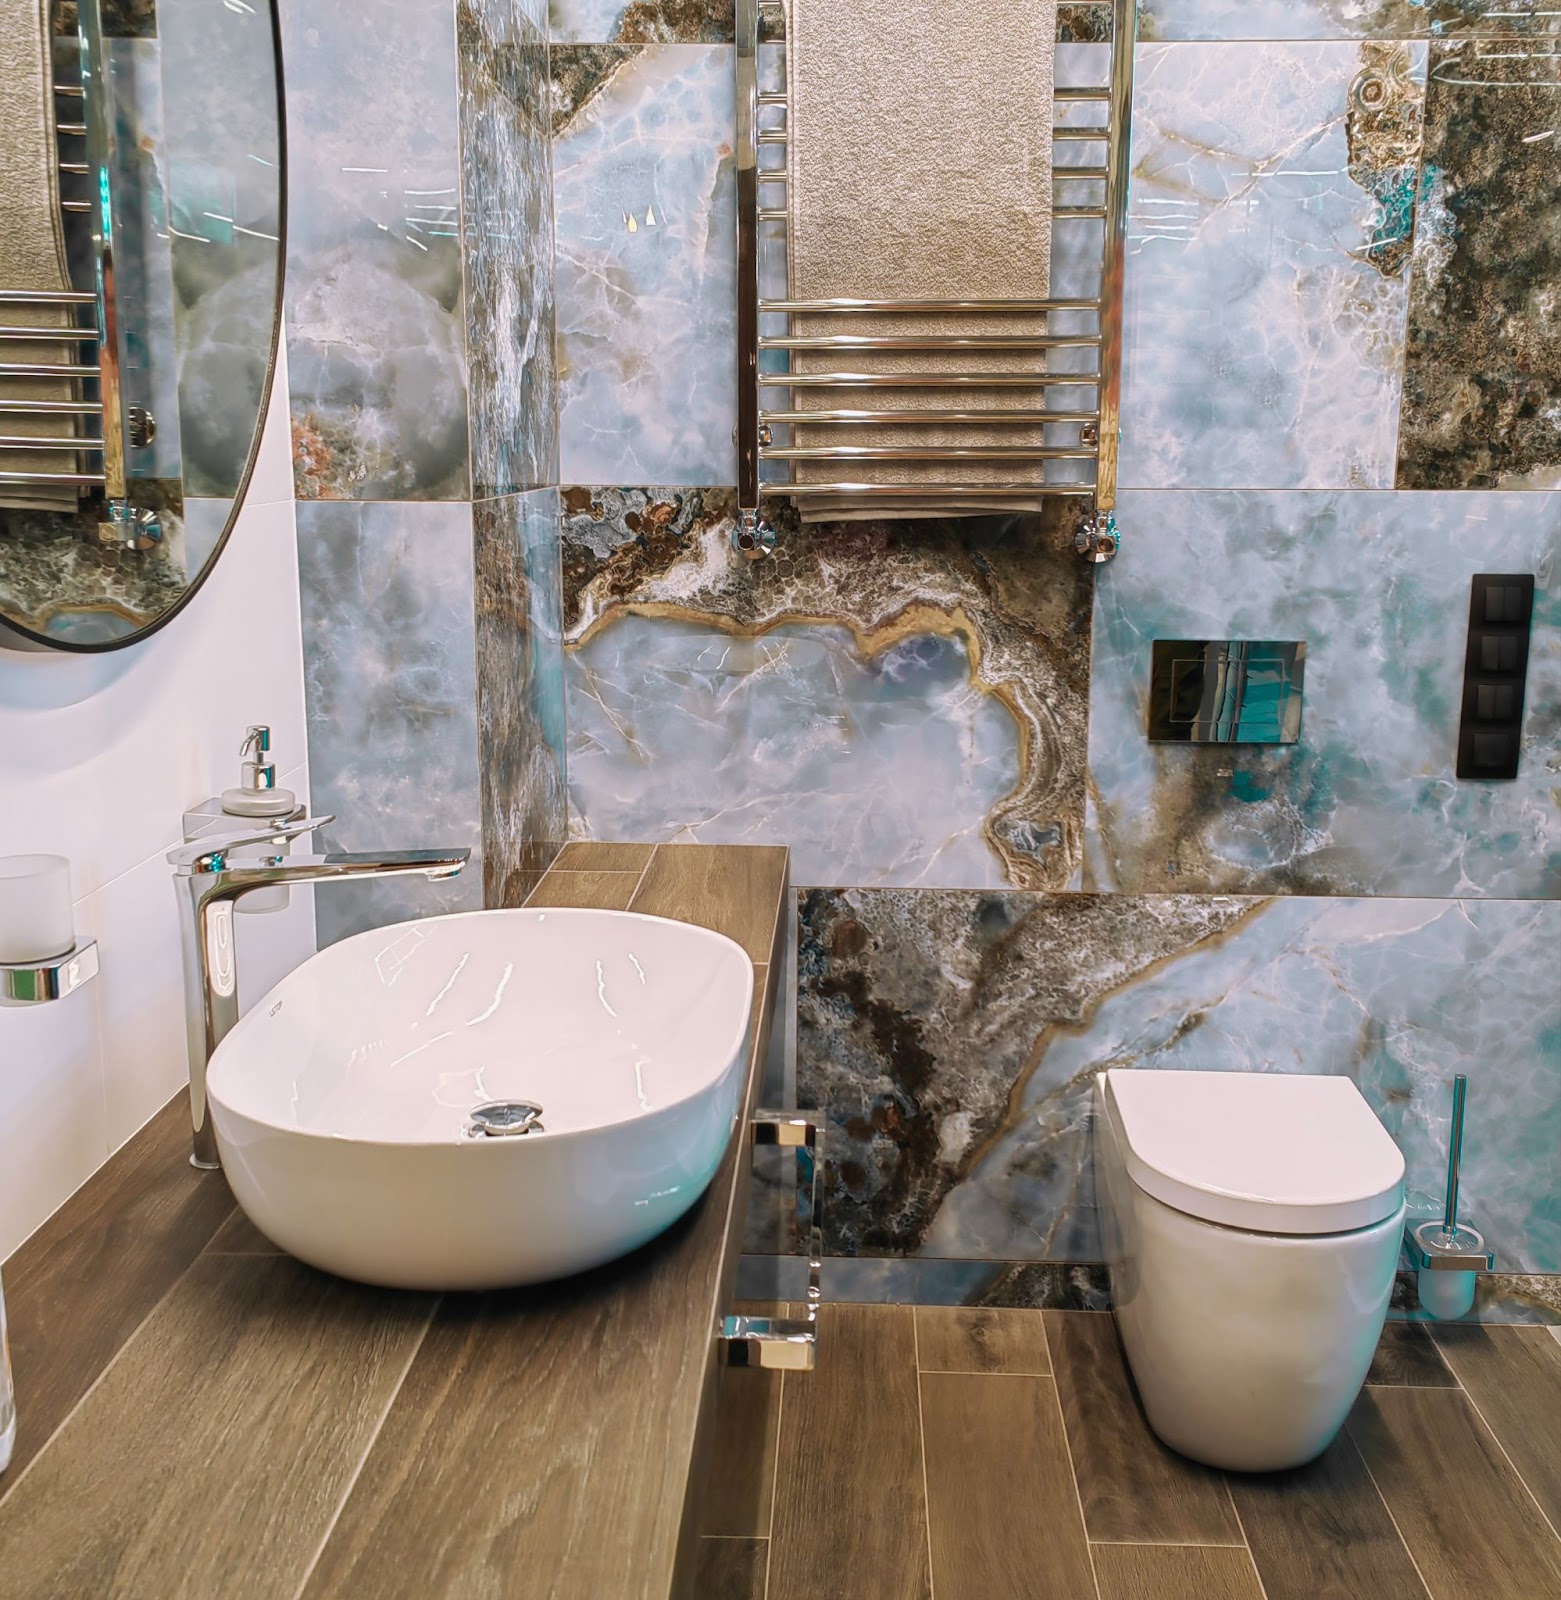  A modern, beautiful bathroom includes a smart toilet and sink.